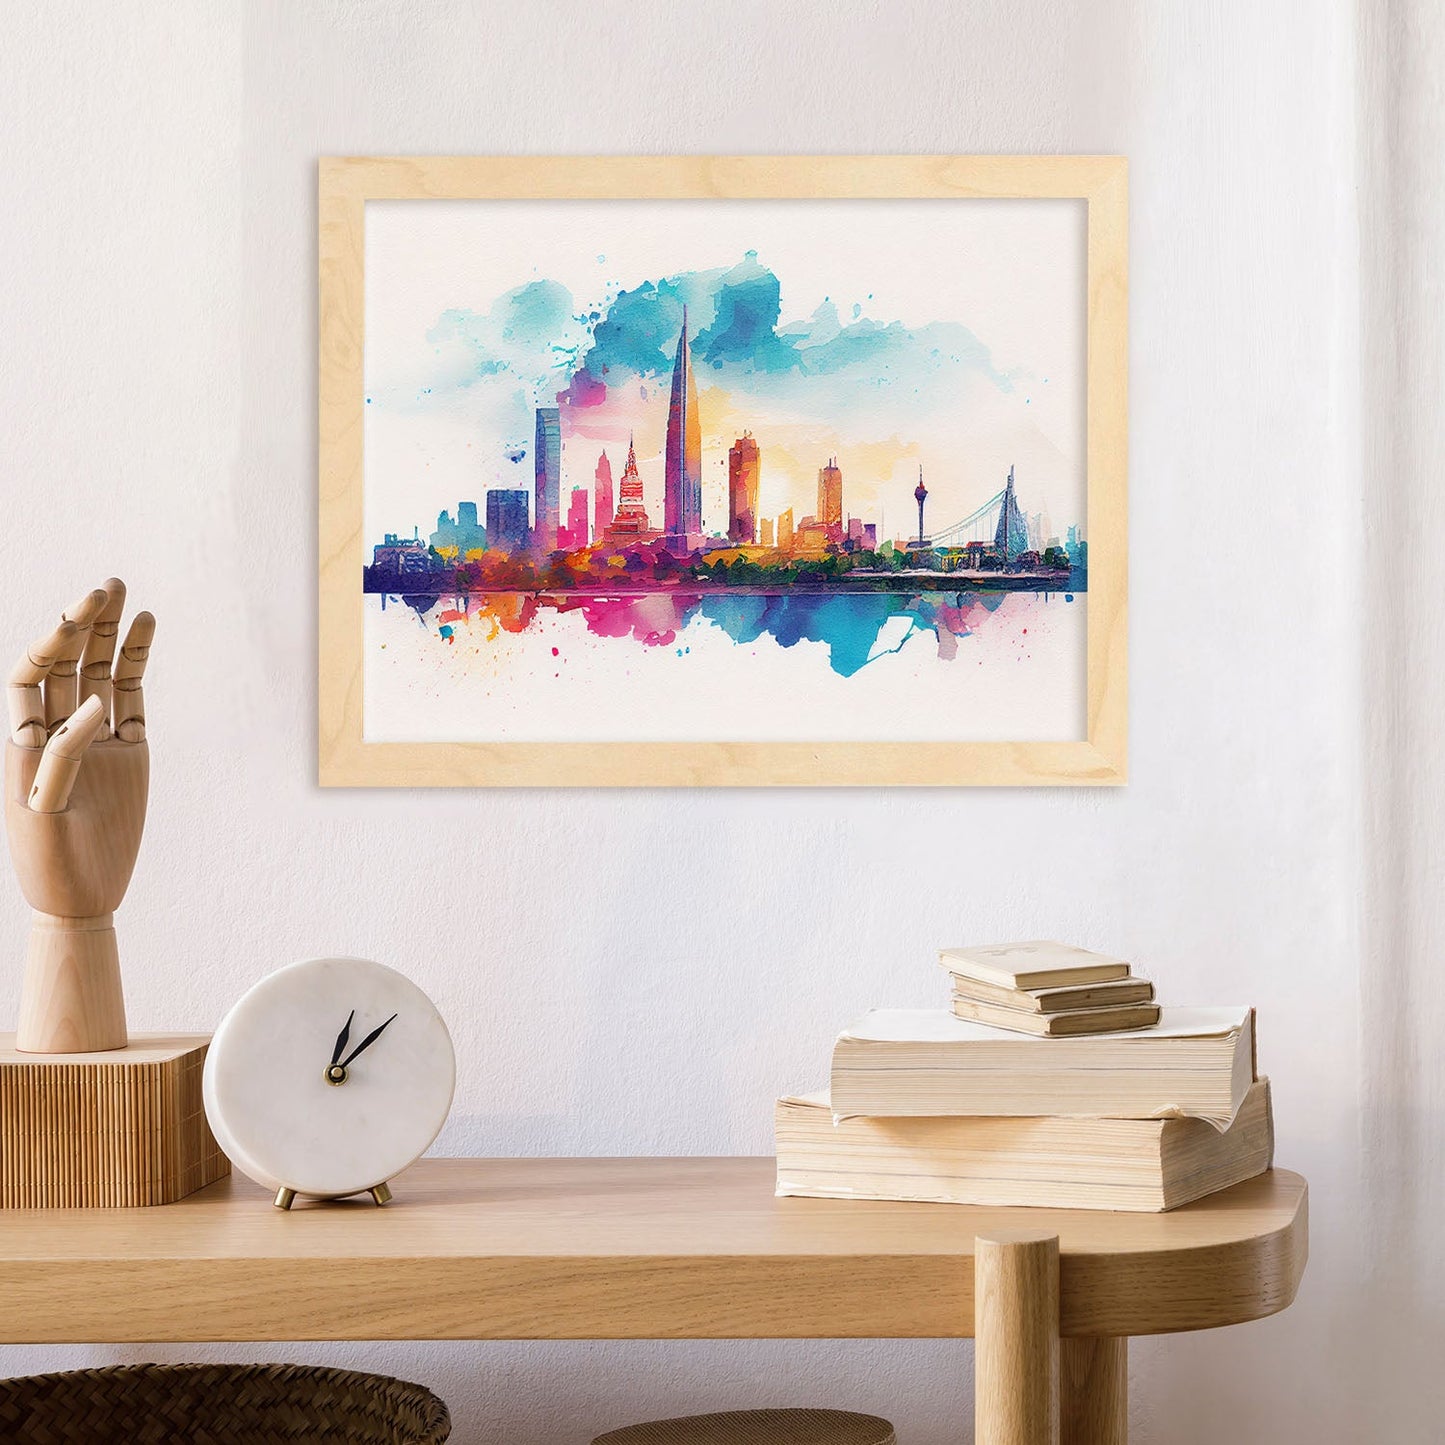 Nacnic watercolor of a skyline of the city of Ho Chi Minh City. Aesthetic Wall Art Prints for Bedroom or Living Room Design.